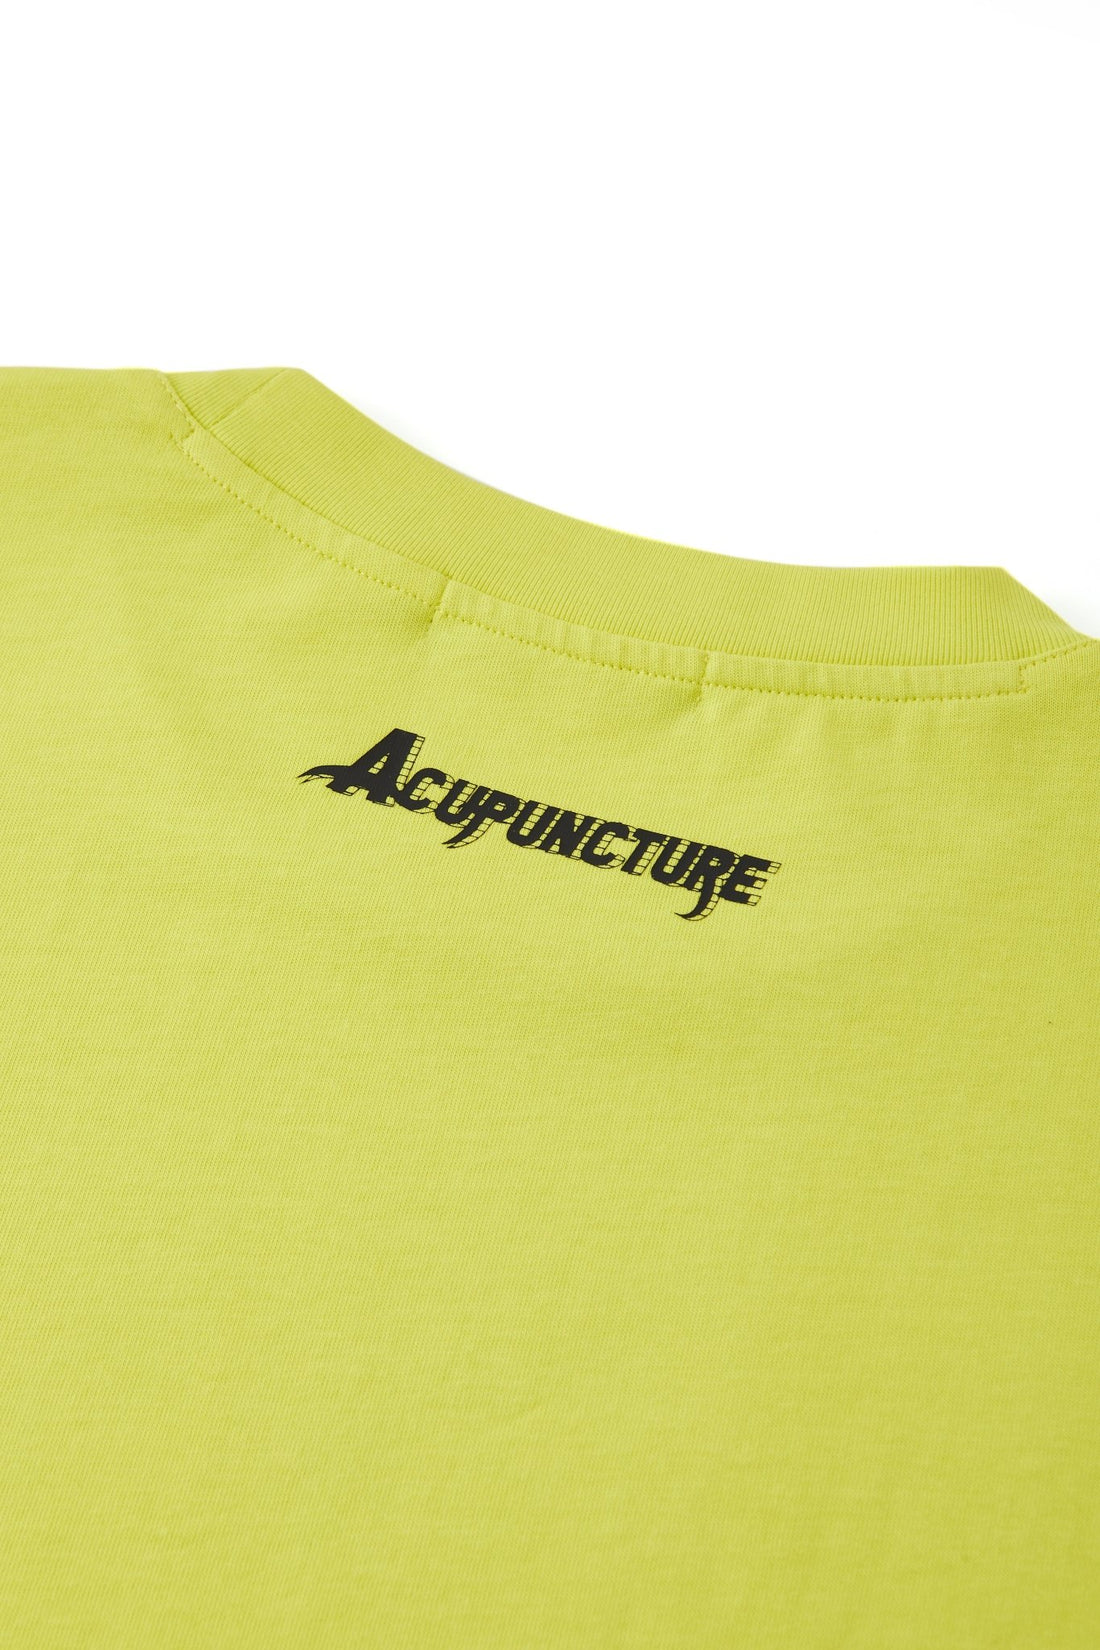 THE PUPIL TSHIRT YELLOW Acupuncture